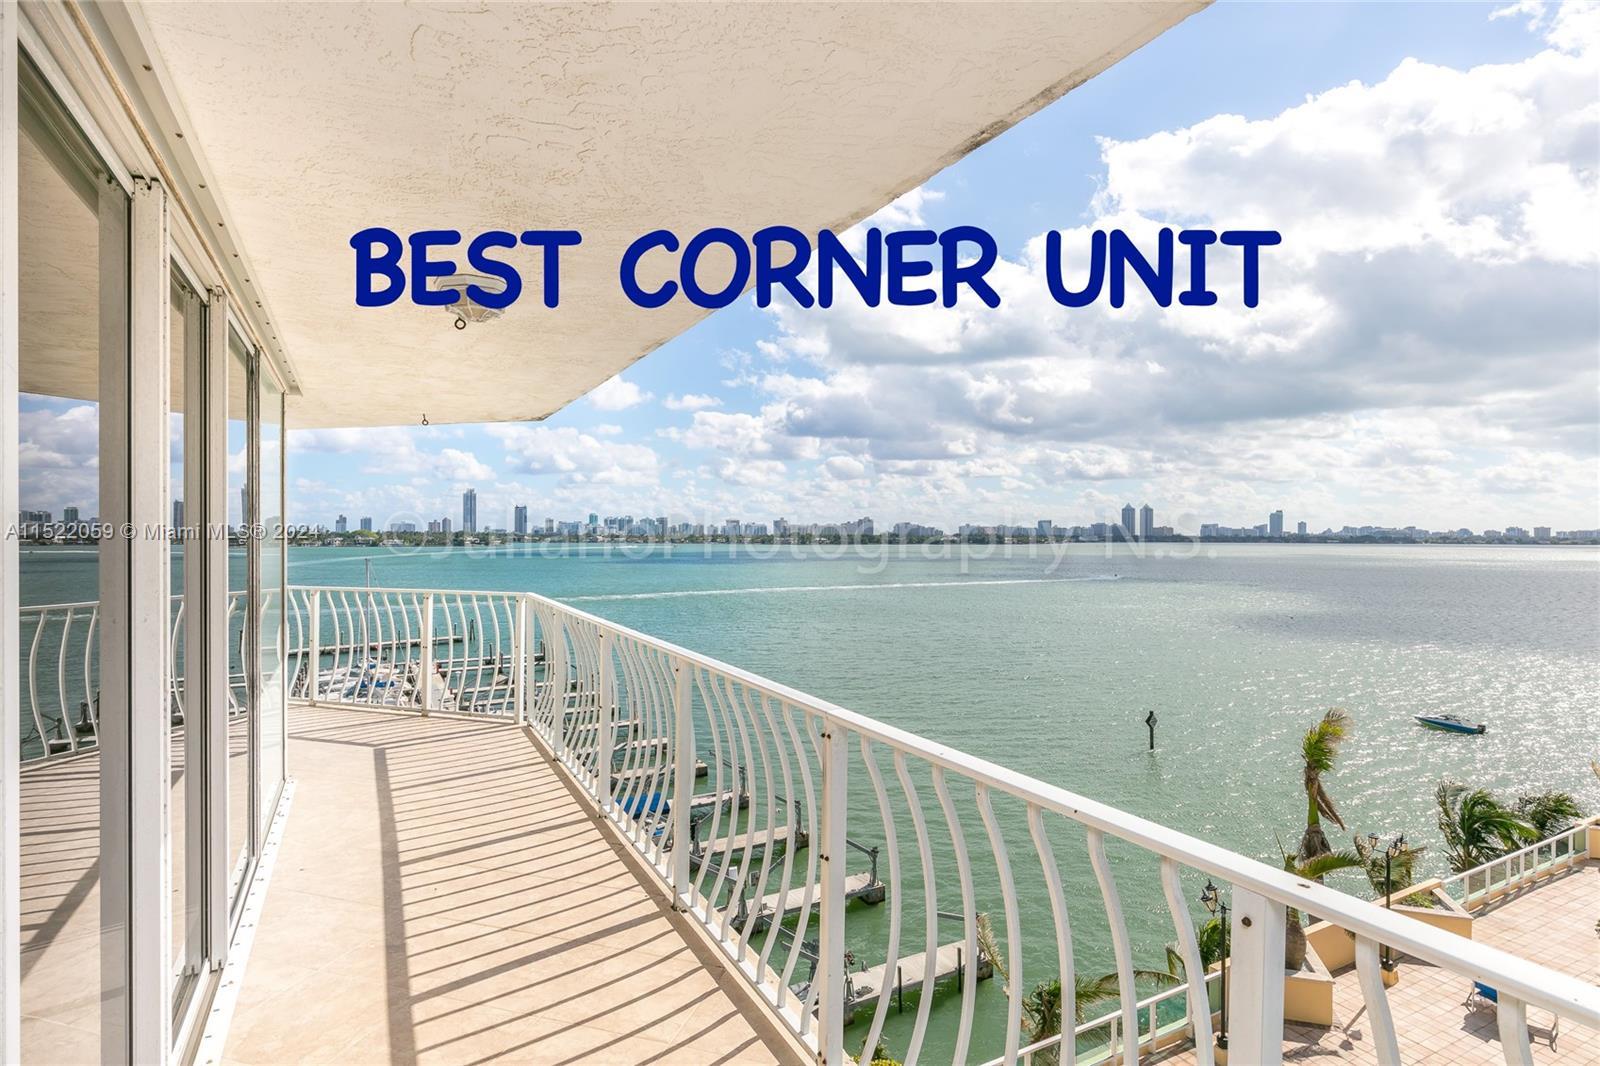 CORNER UNIT RARELY AVAILABLE IN THIS LINE!!! 2B/2B WITH UNOBSTRUCTED VIEWS OF BISCAYNE BAY AND THE M